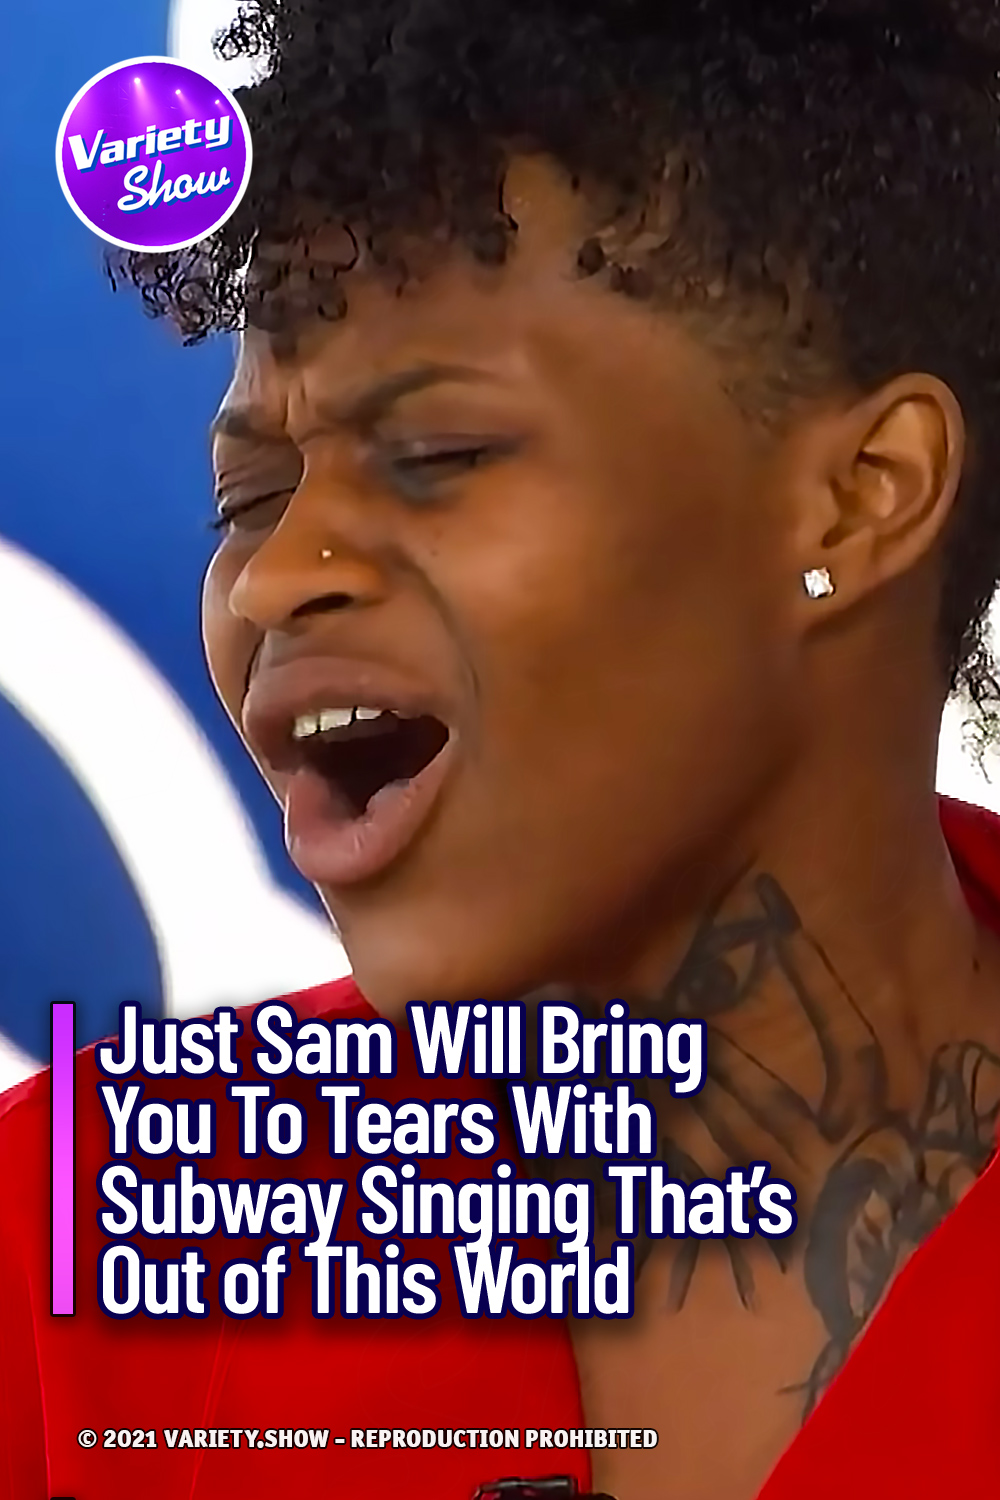 Just Sam Will Bring You To Tears With Subway Singing That’s Out of This World